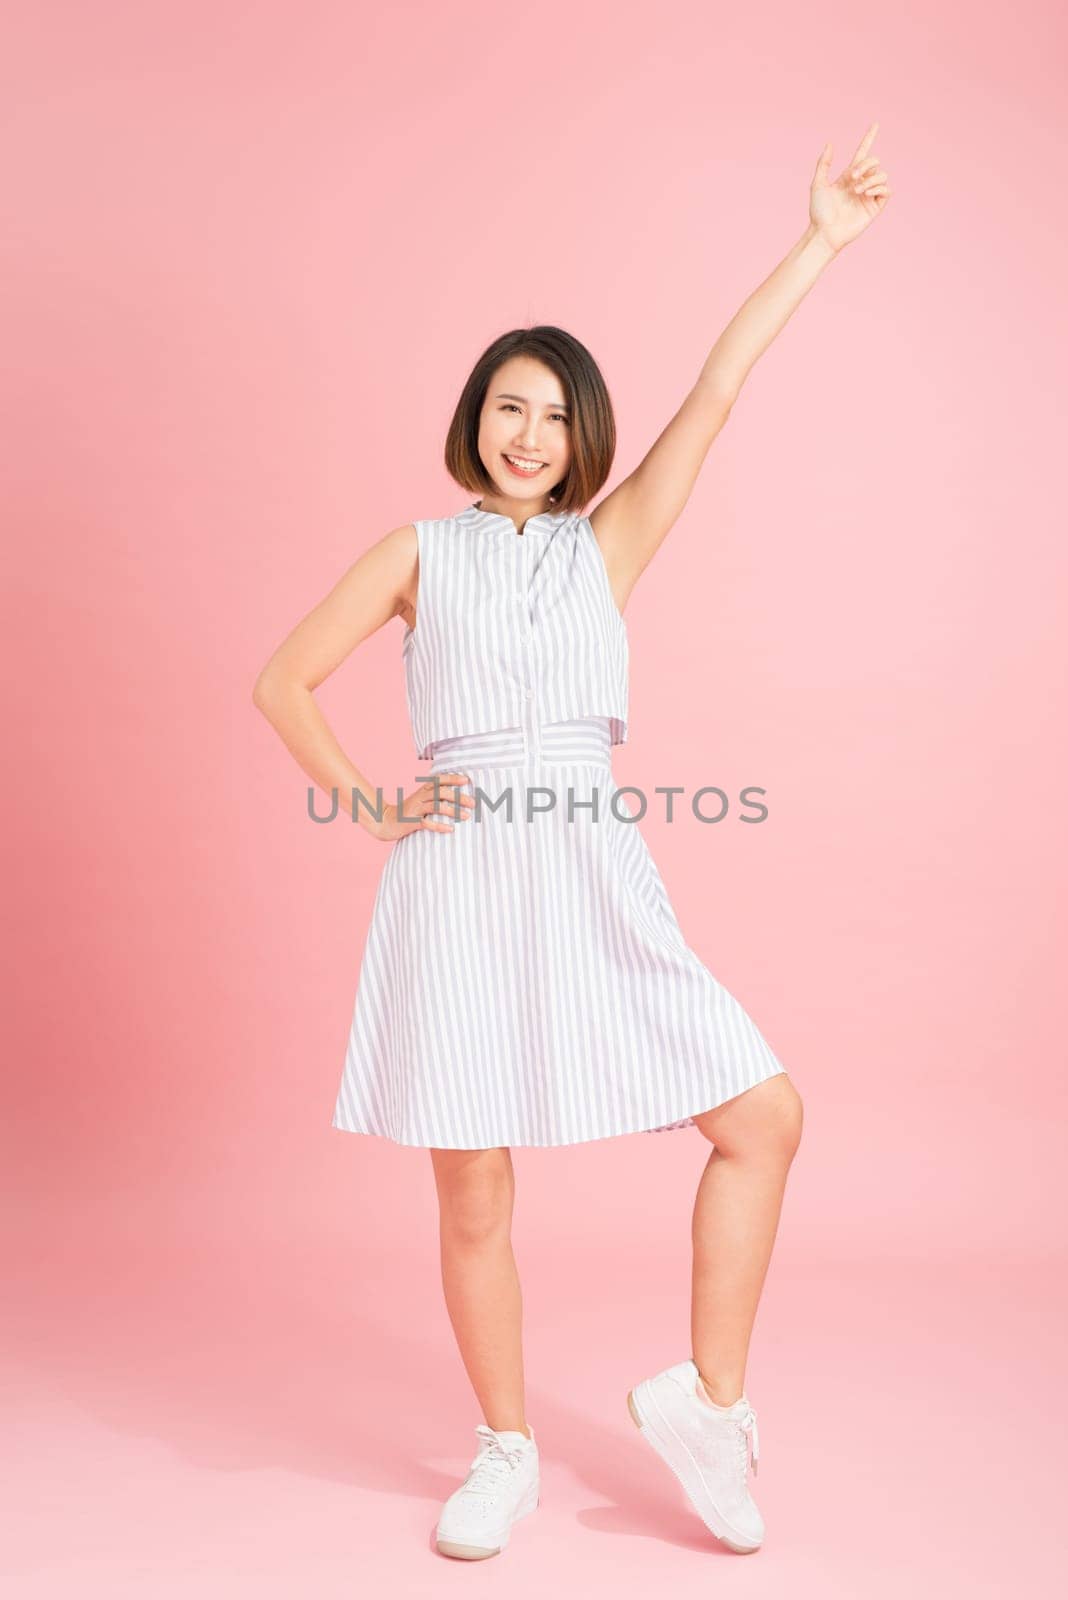 Beautiful young woman in light blue dress dancing on pink background by makidotvn